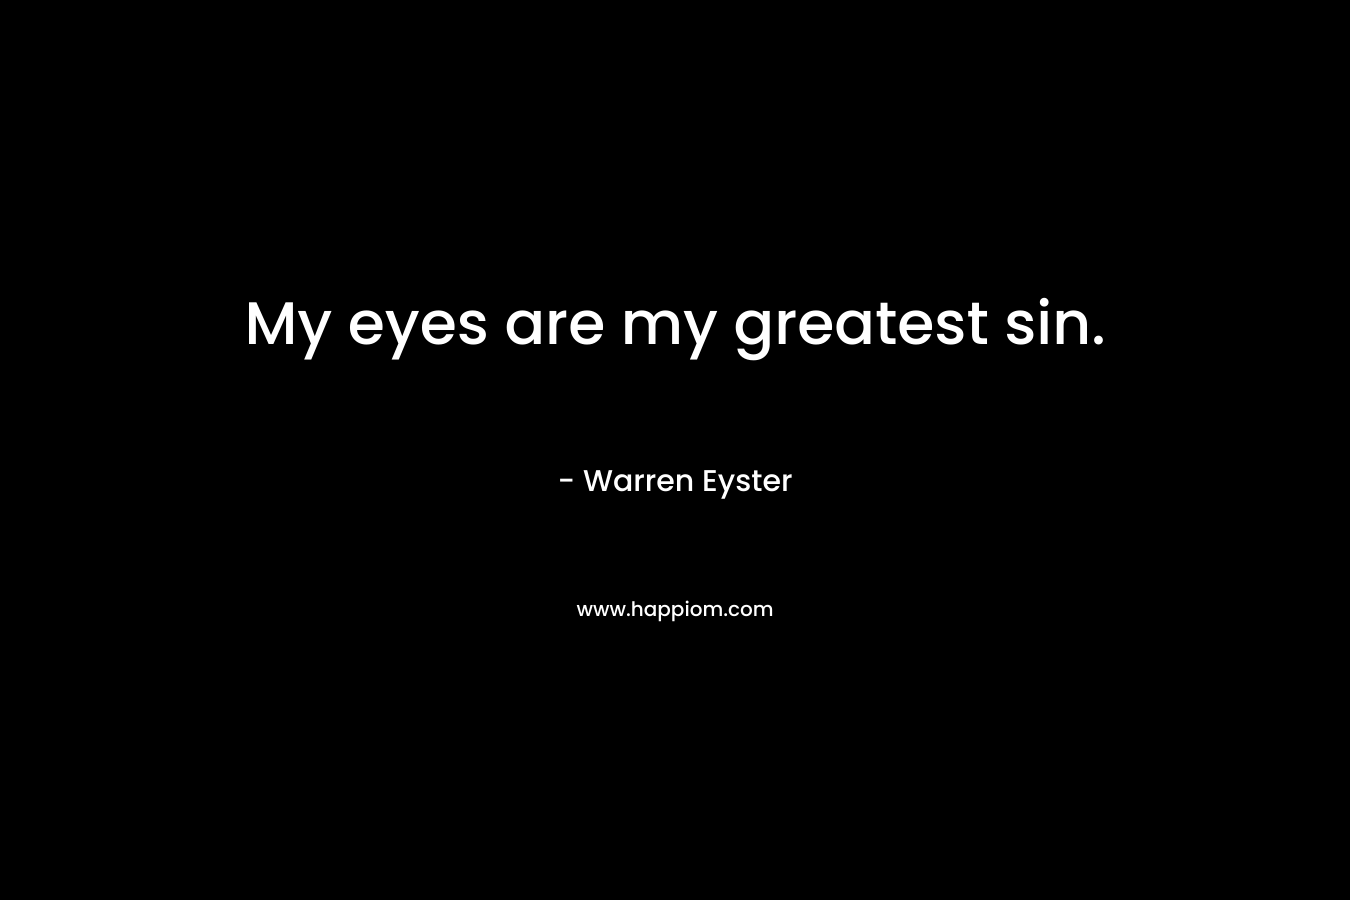 My eyes are my greatest sin.